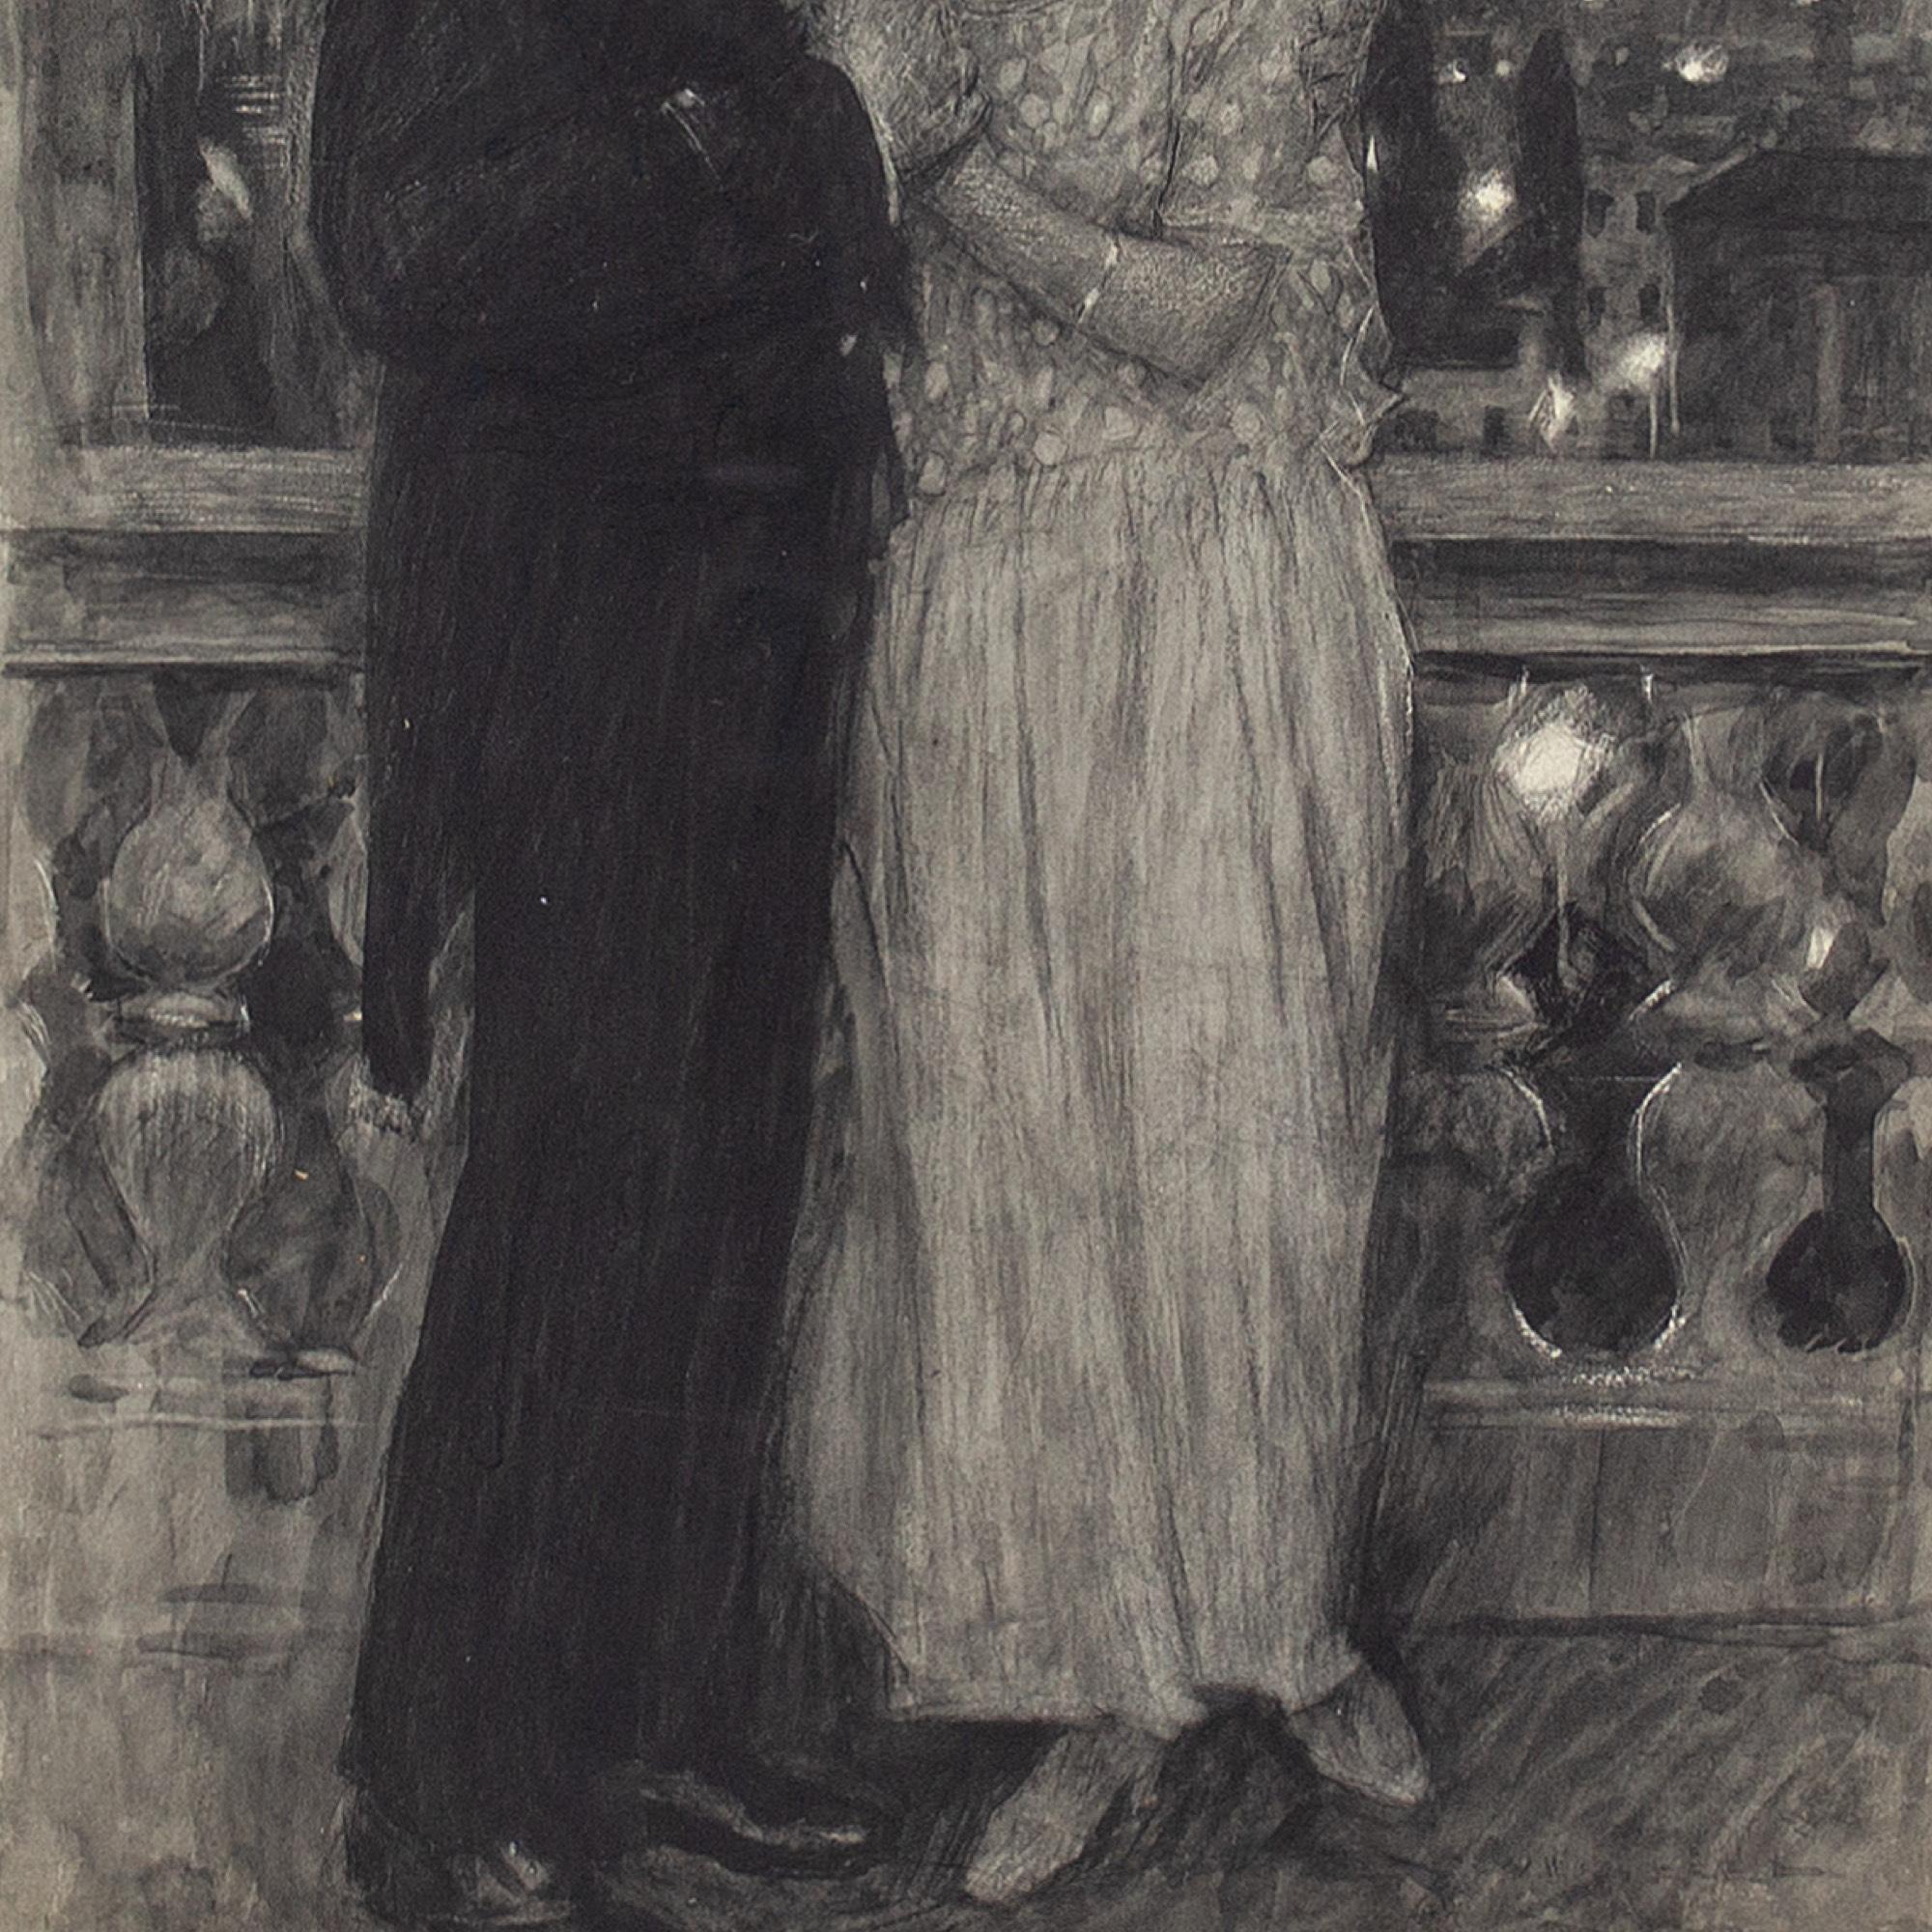 William Hatherell, The Balcony Embrace, Watercolour 2